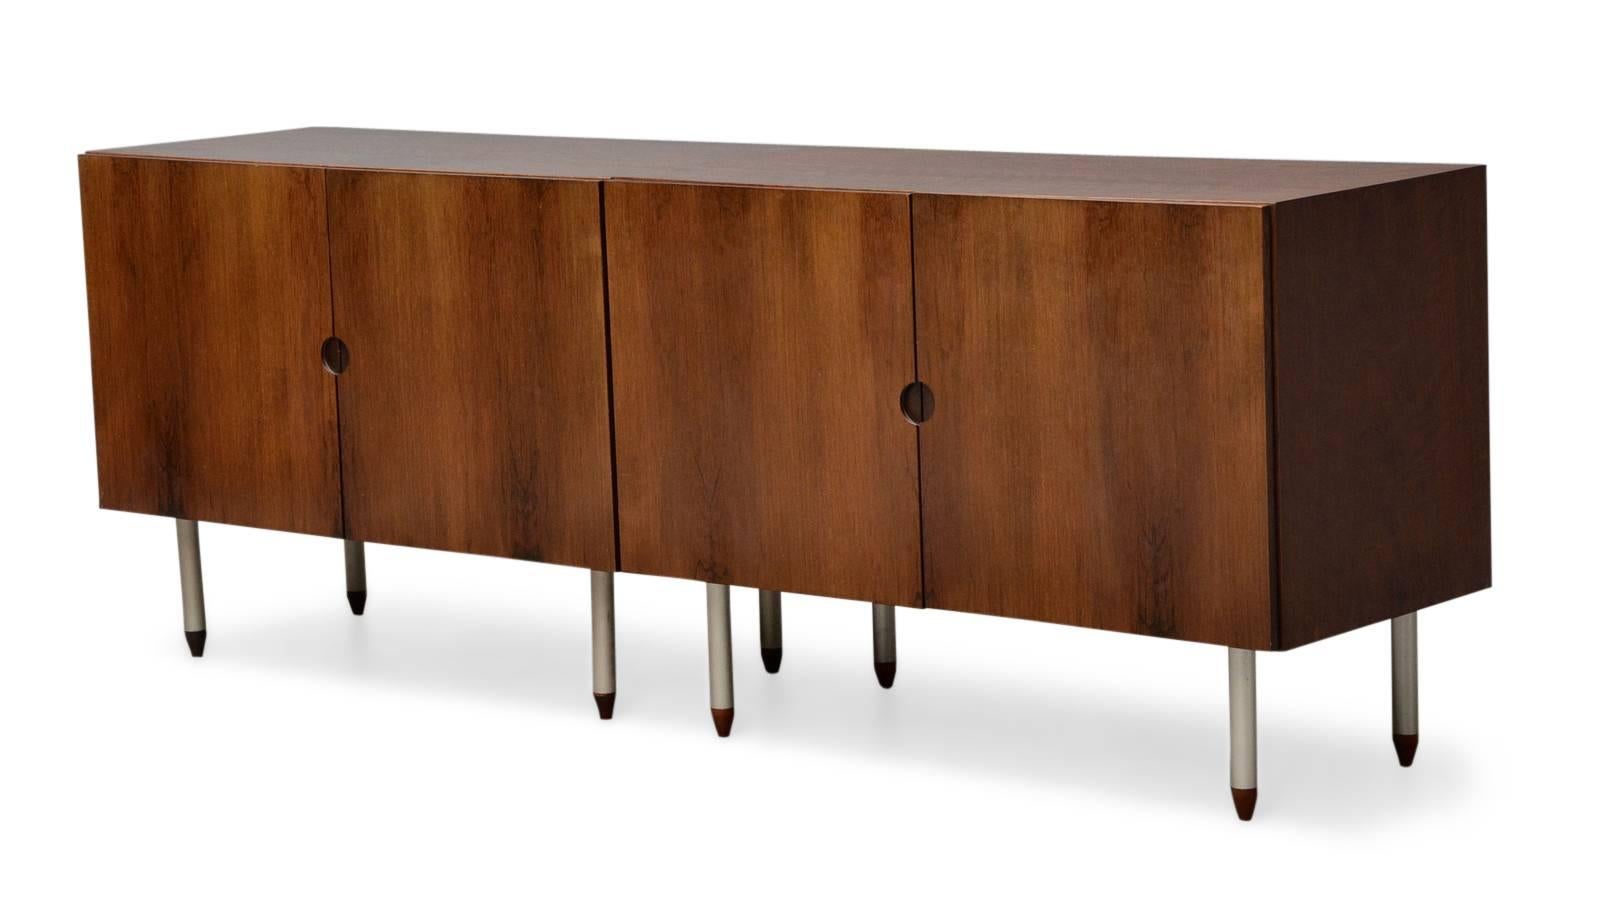 A pair of low sideboards, plated with mahogany. Front with doors enclosing shelves. Resting on new metal and wood feet.
Dimensions per sideboard H. 73.5 cm, B. 100 cm, D. 47 cm.
Wear marks, including some flaws, as well as scratches and pressure